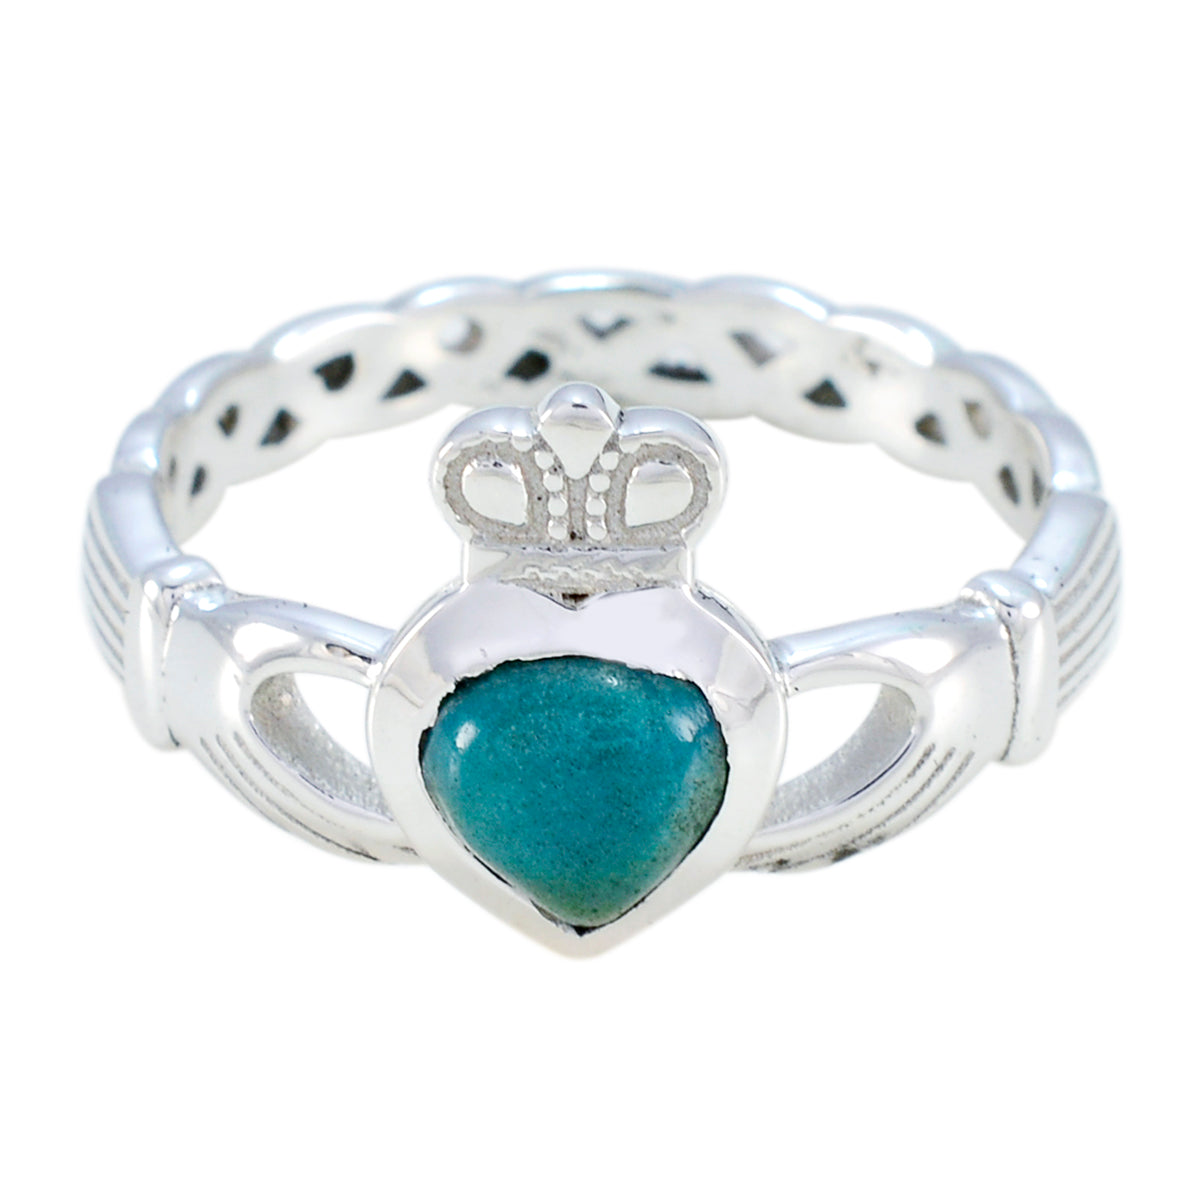 Marvelous Stone Turquoise 925 Sterling Silver Ring Rainbow Jewelry